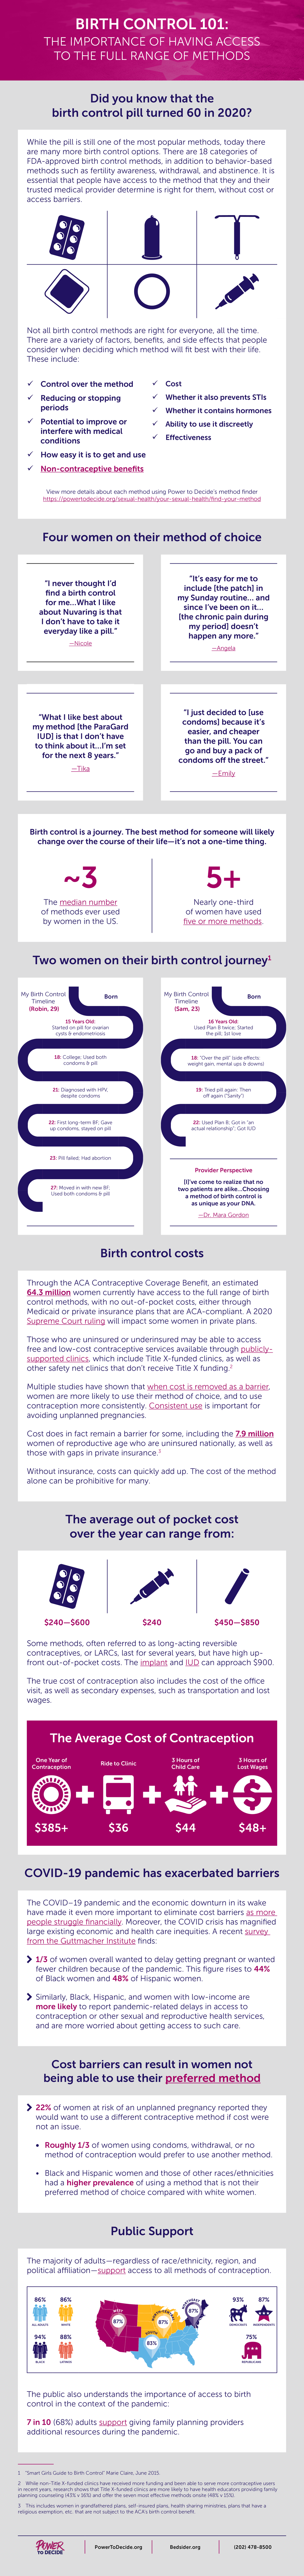 The full infographic describing the importance of having access to the full range of contraceptive methods in the United States. 